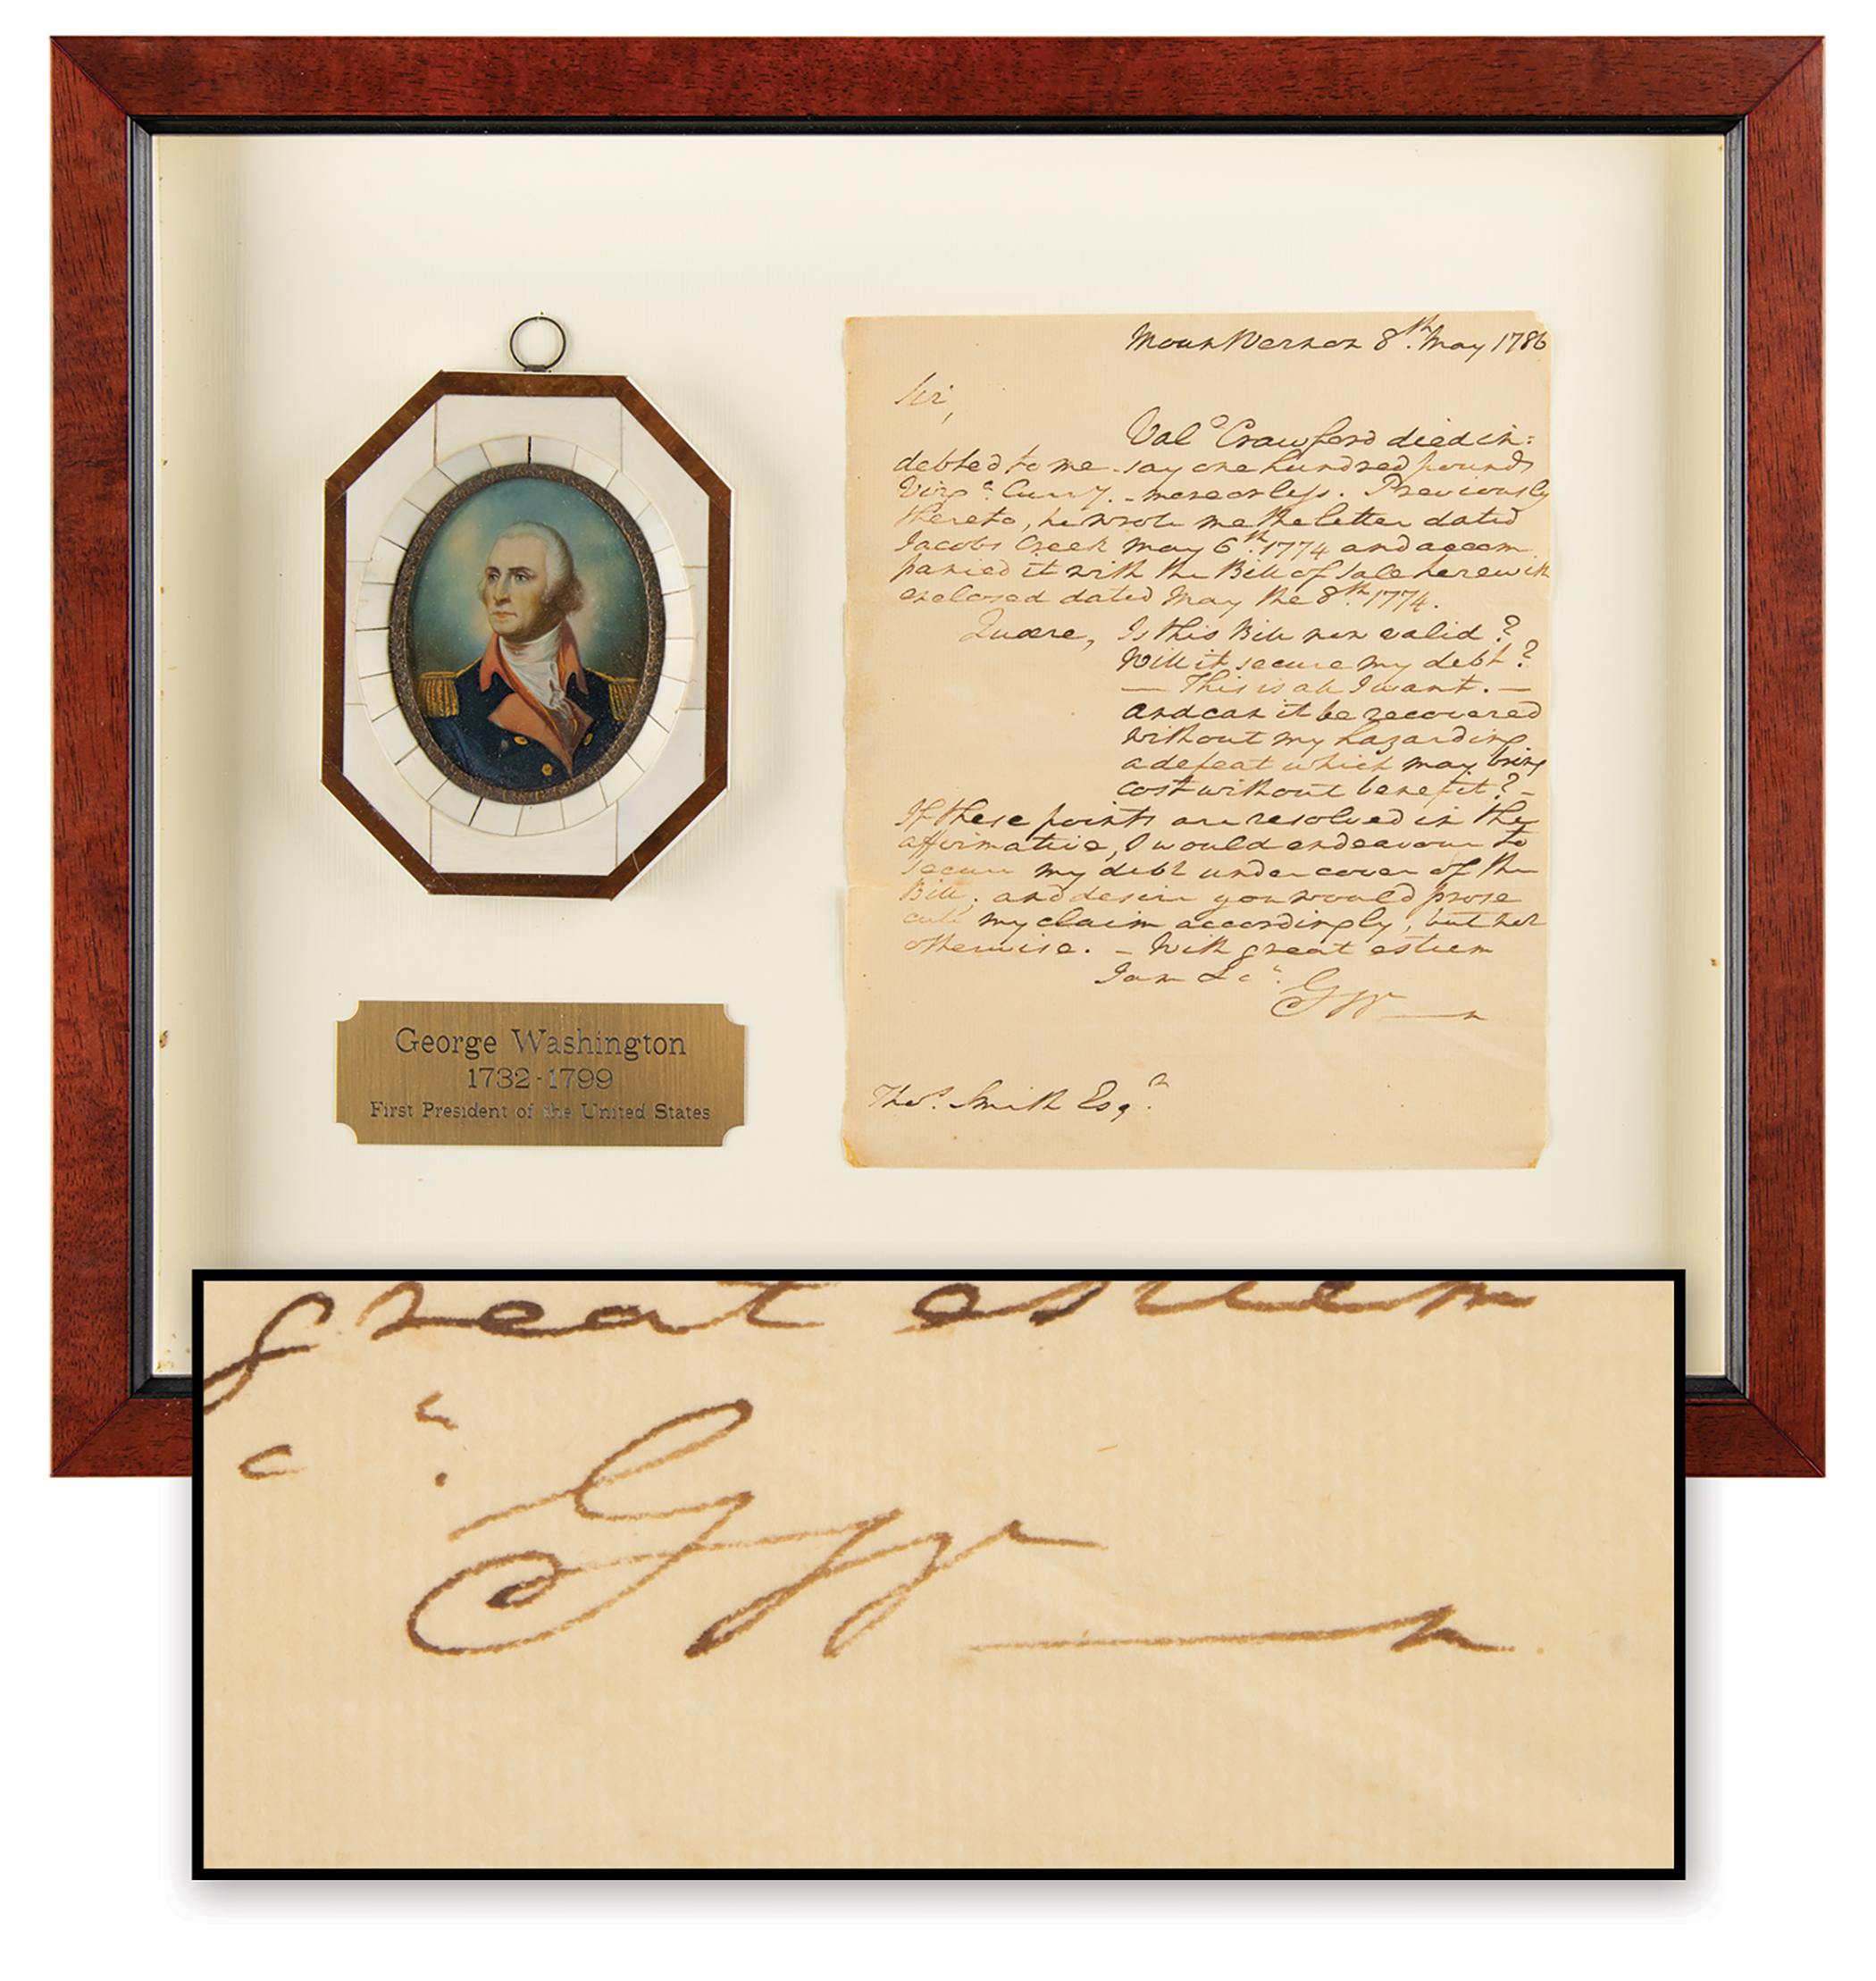 Lot #3 George Washington Autograph Letter Signed from Mount Vernon on Debt Collection - Image 1